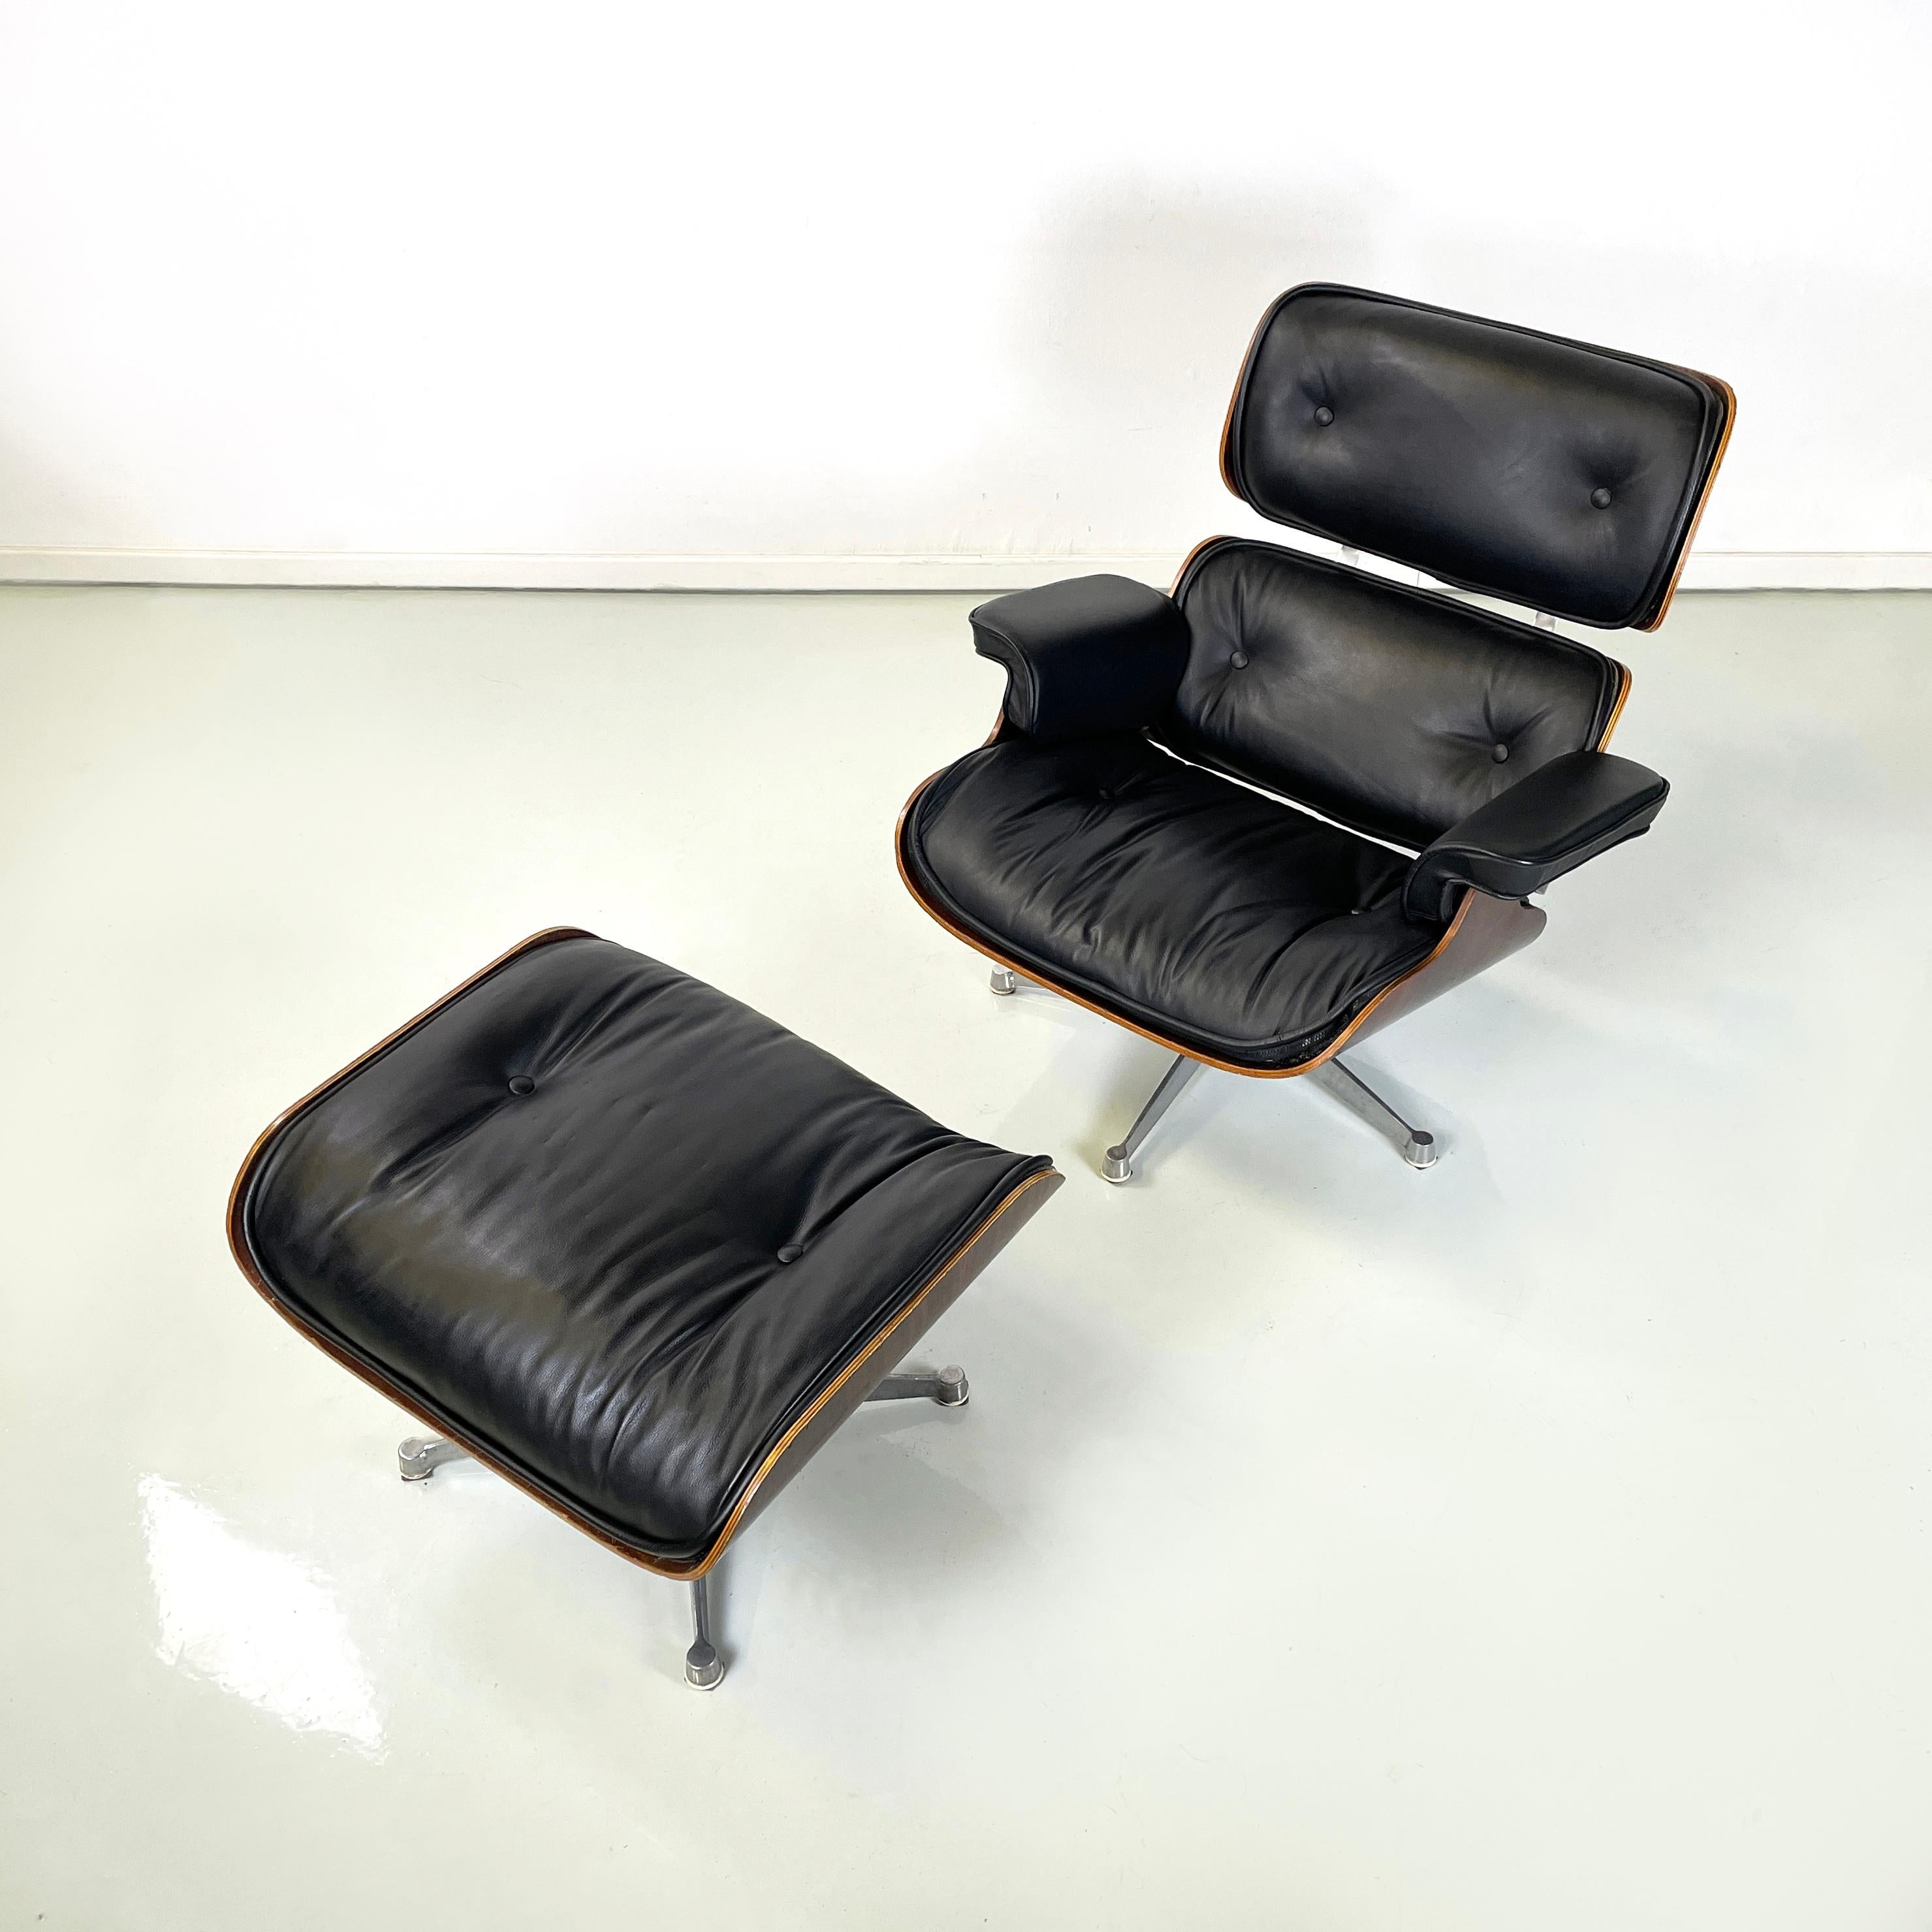 Usa modern Armchair and ottoman mod. 670 and 671 by Charles and Ray Eames for Herman Miller, 1970s
Iconic and vintage set of armchair and ottoman mod. 670 and 671 with wooden structure. The armchair is composed of a square seat and backrest with